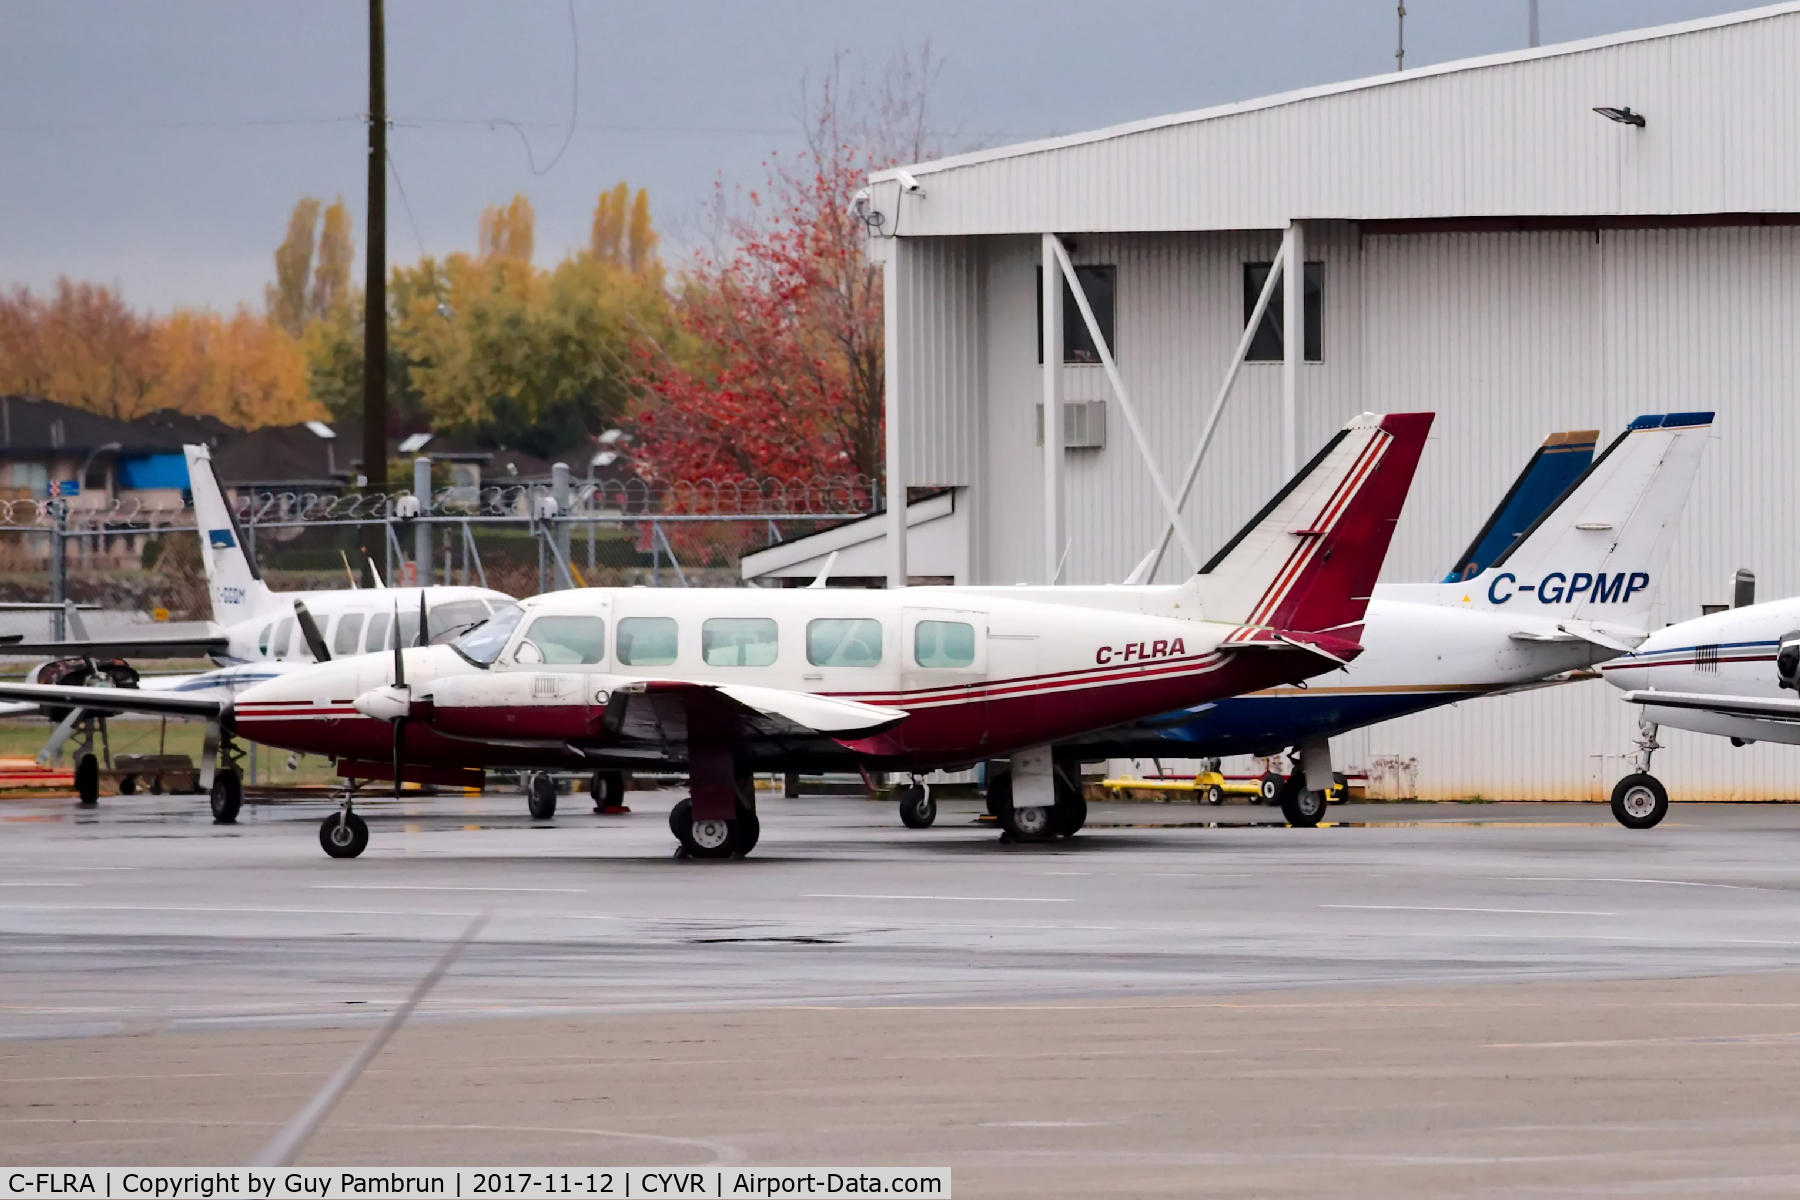 C-FLRA, 1979 Piper PA-31-350 Chieftain C/N 31-7952091, Parked